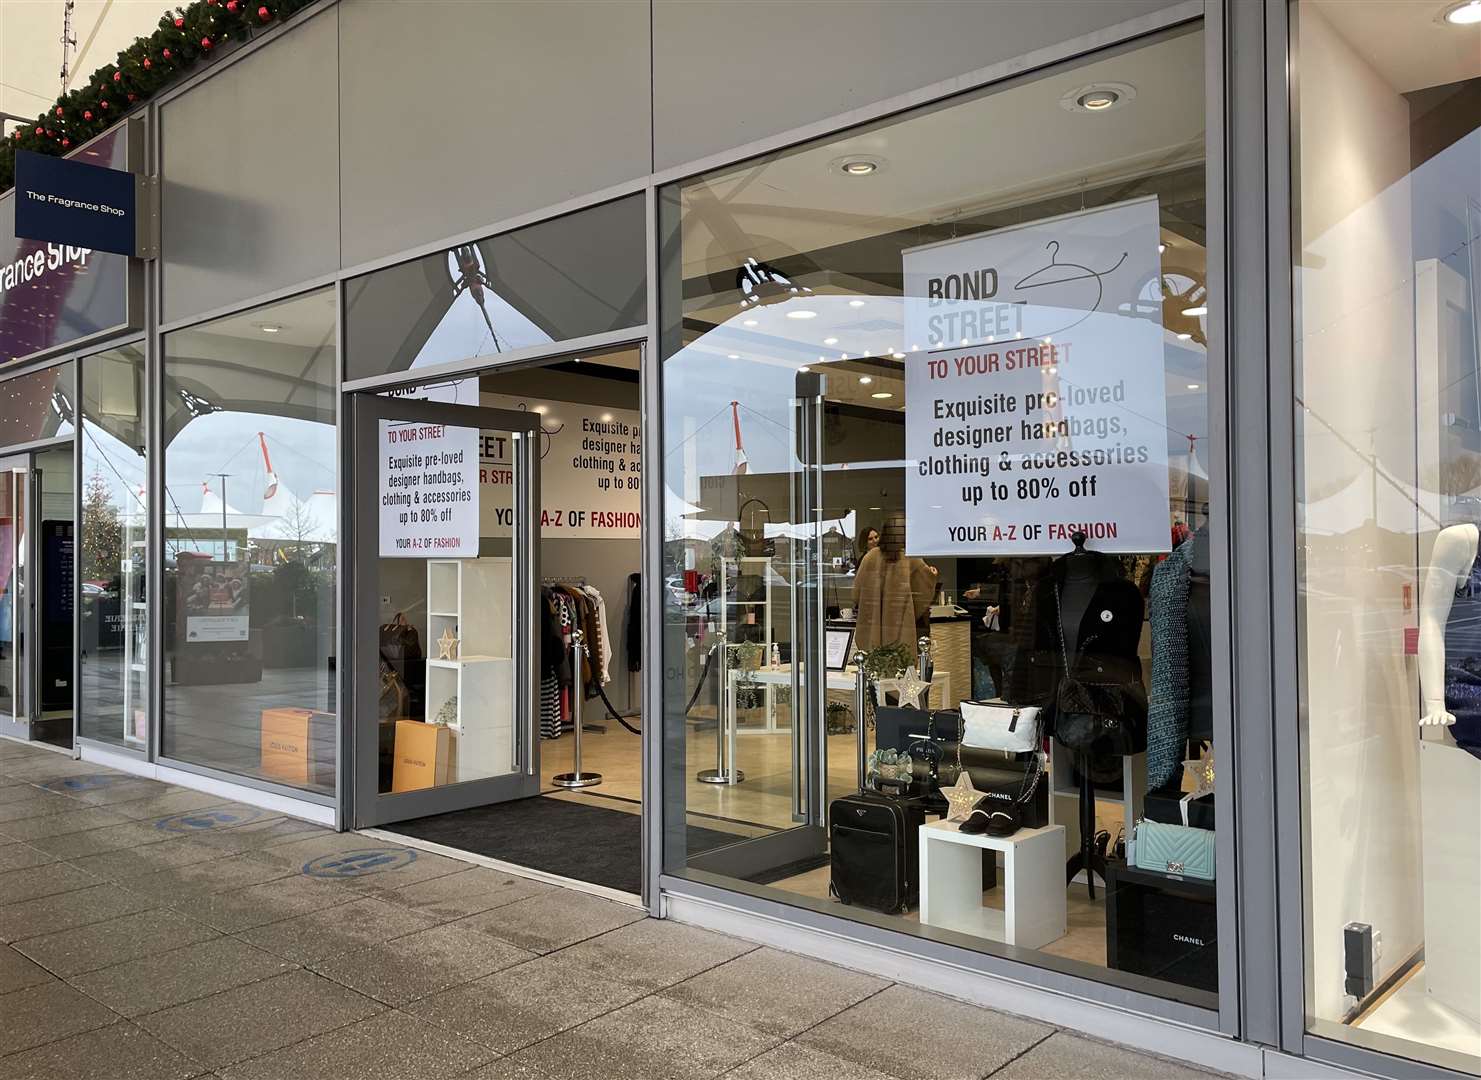 The chain has recently opened a store at the Designer Outlet in Ashford